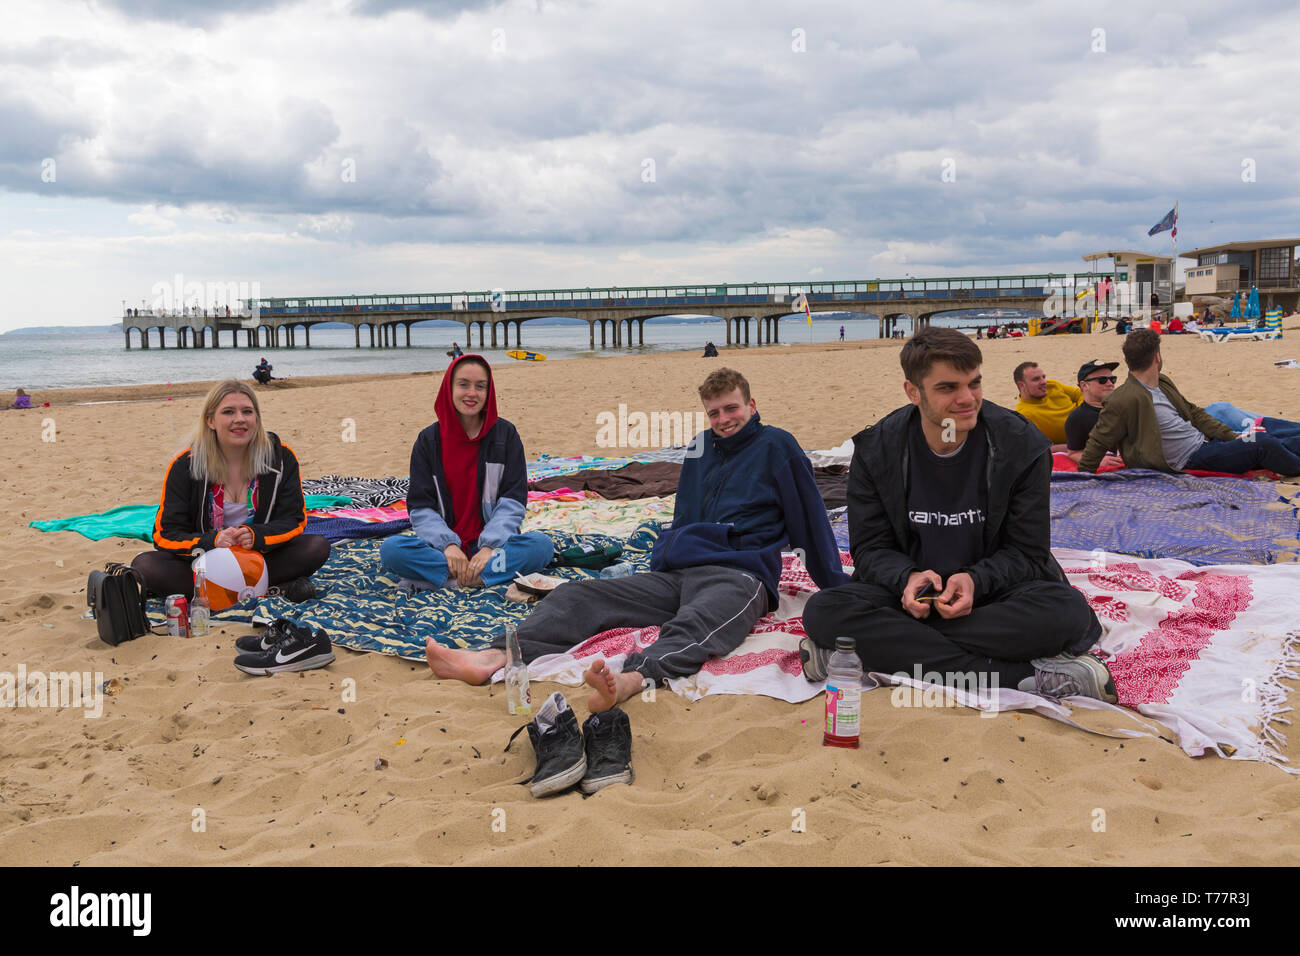 Boscombe, Bournemouth, Dorset, UK. 5th May 2019. Bournemouth Emerging Arts Fringe (BEAF) Festival attracts visitors at Boscombe with arts, exhibitions, music events, theatre, performances, film, dance, workshops. Reefiesta Urban Reef tropical tiki takeover including Boscombe's biggest beach blanket. Credit: Carolyn Jenkins/Alamy Live News Stock Photo